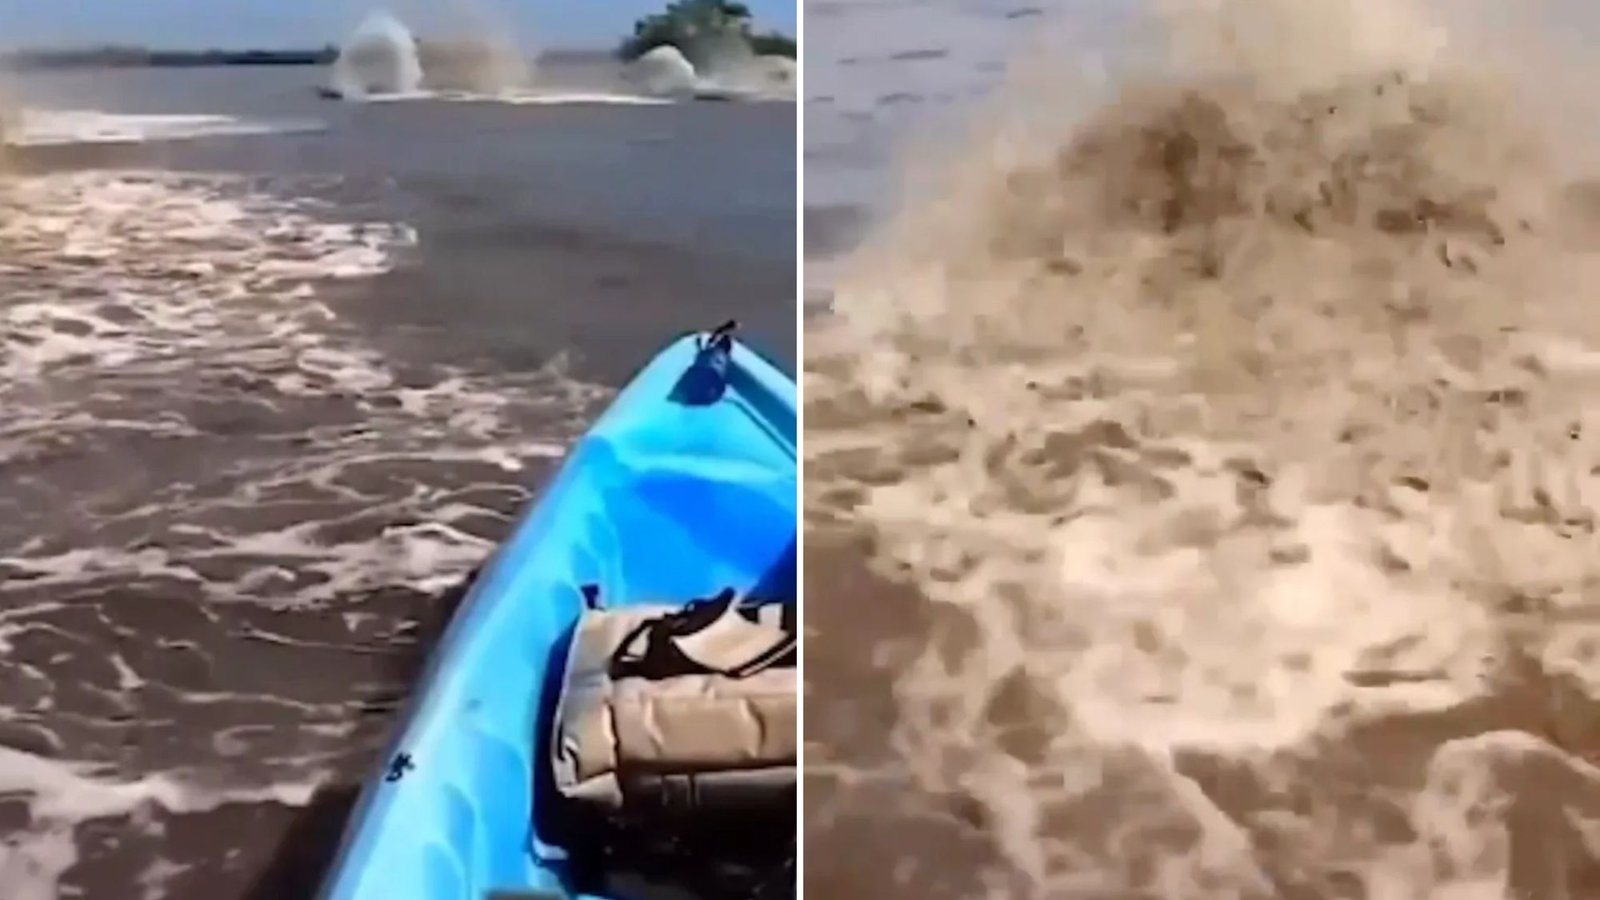 Shocking POV vid shows moment kayaker is nearly capsized by pack of ‘mystery sea blobs’ that suddenly thrash in water